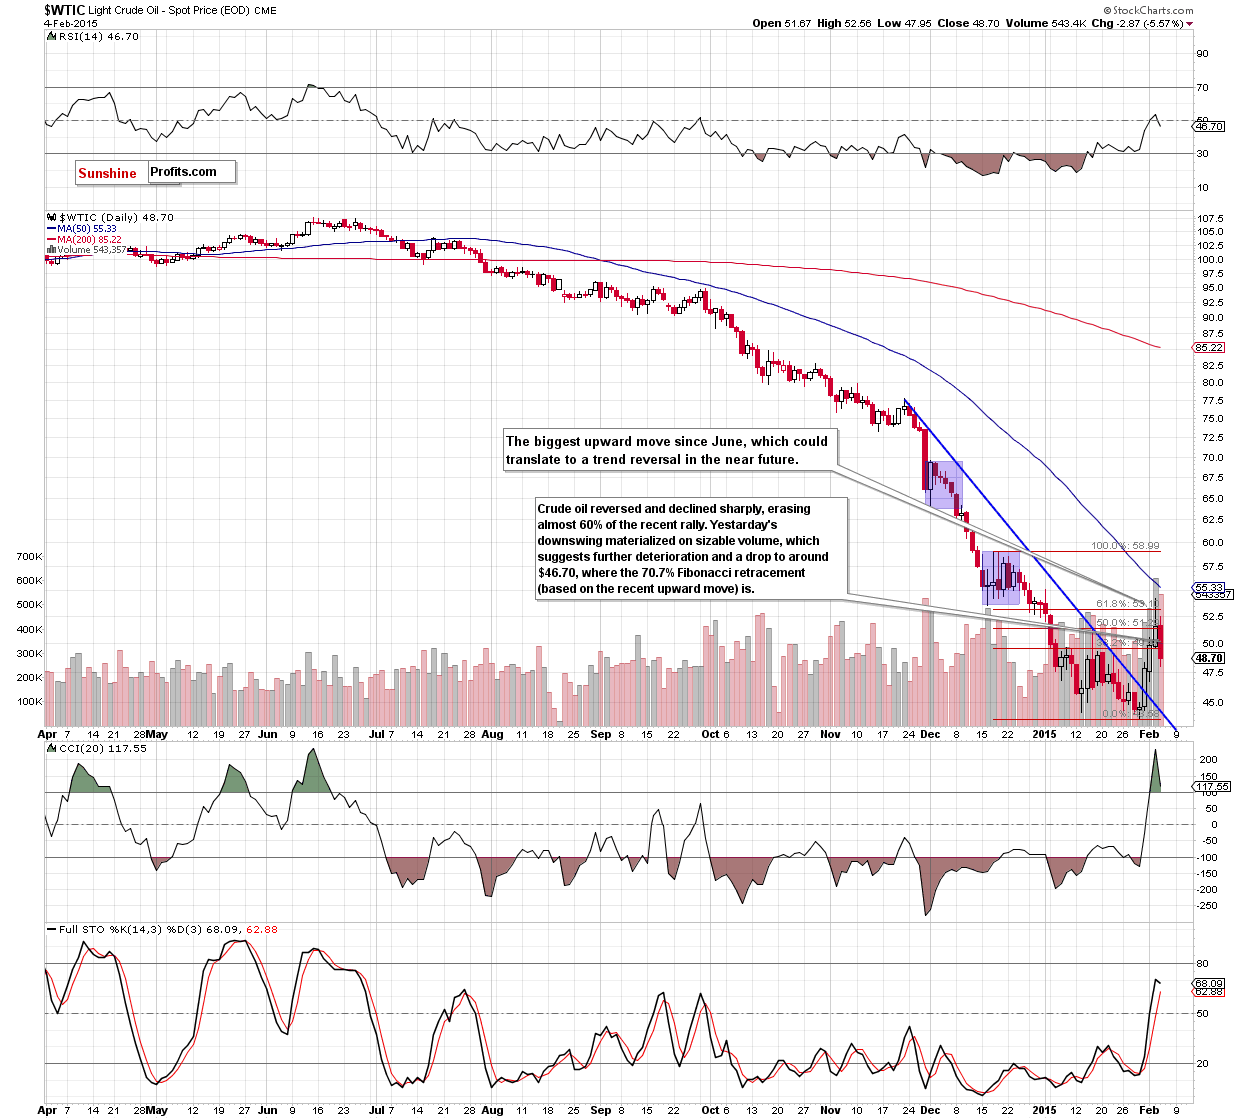 WTIC crude oil daily chart